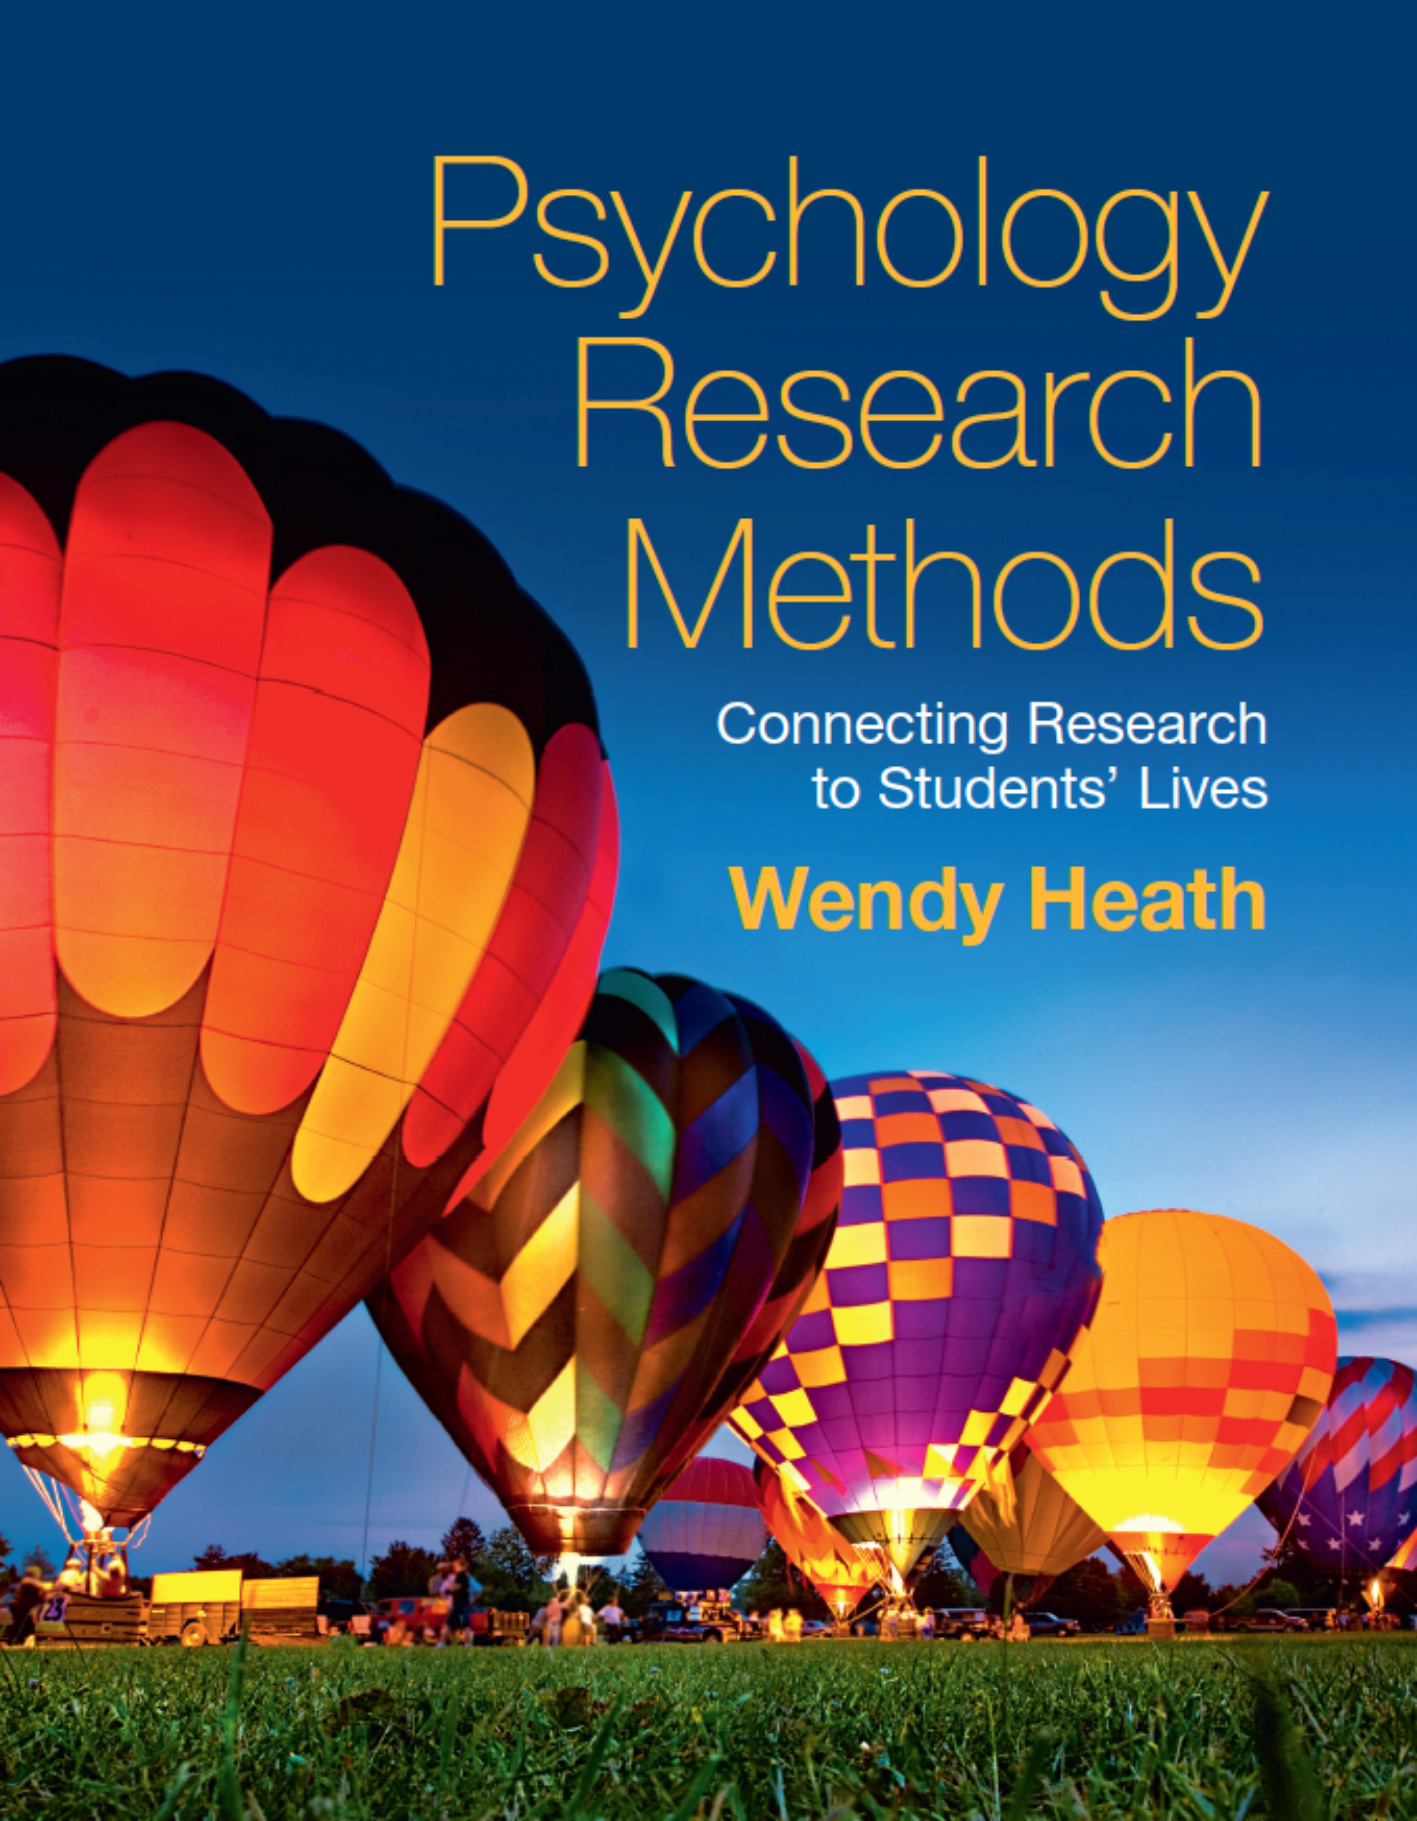 Psychology Research Methods textbook cover